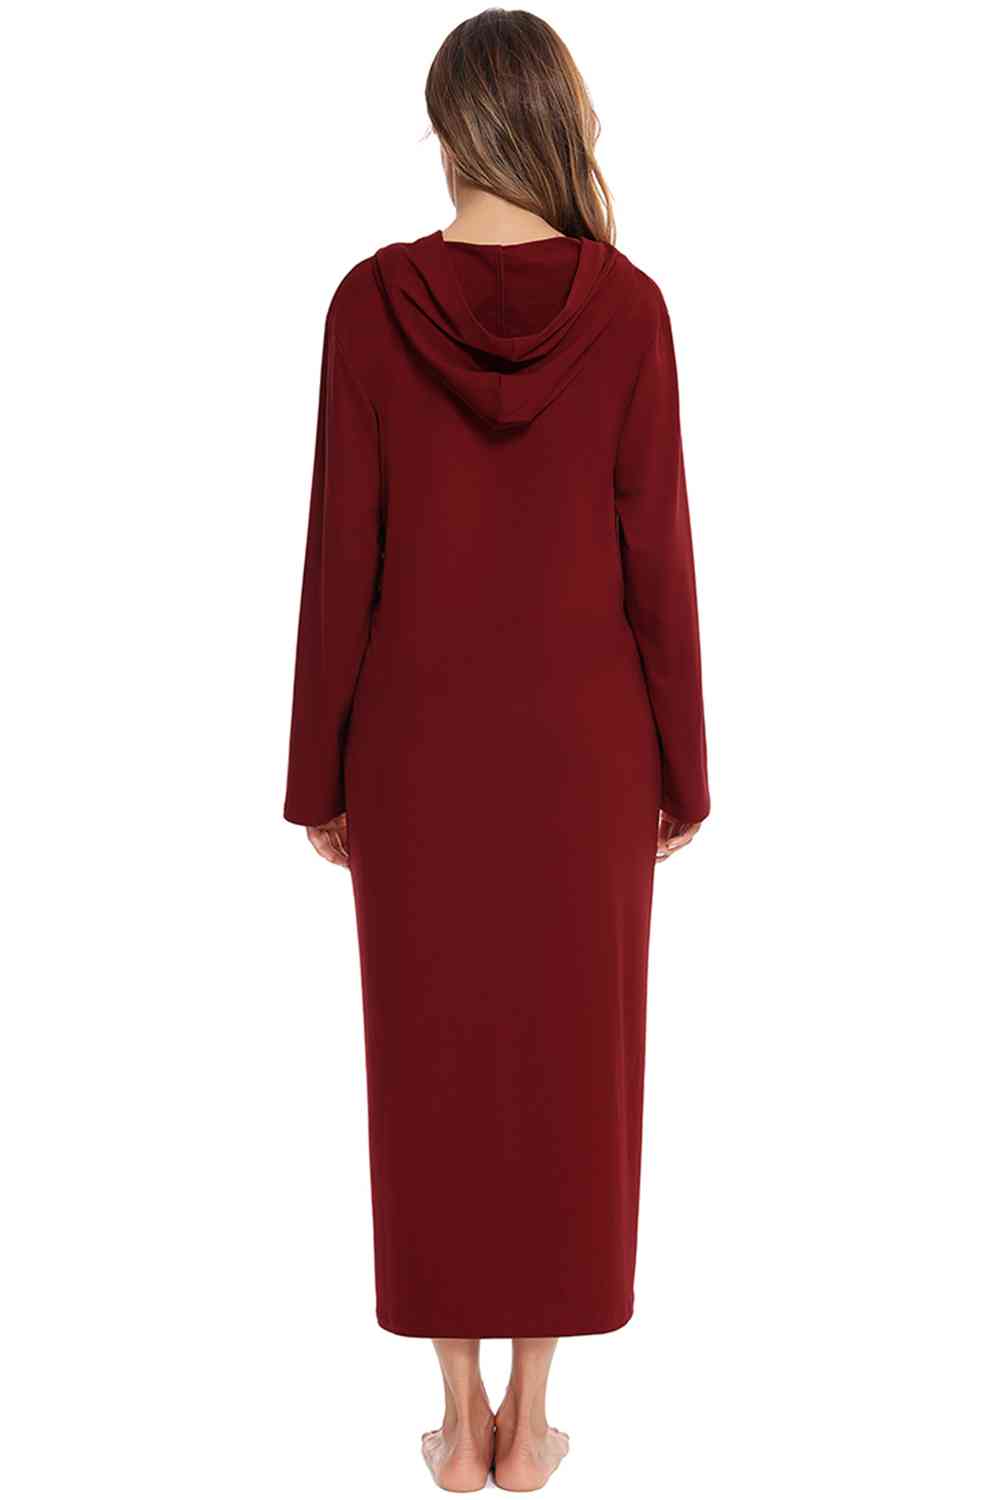 Zip Front Hooded Night Dress with Pockets king-general-store-5710.myshopify.com